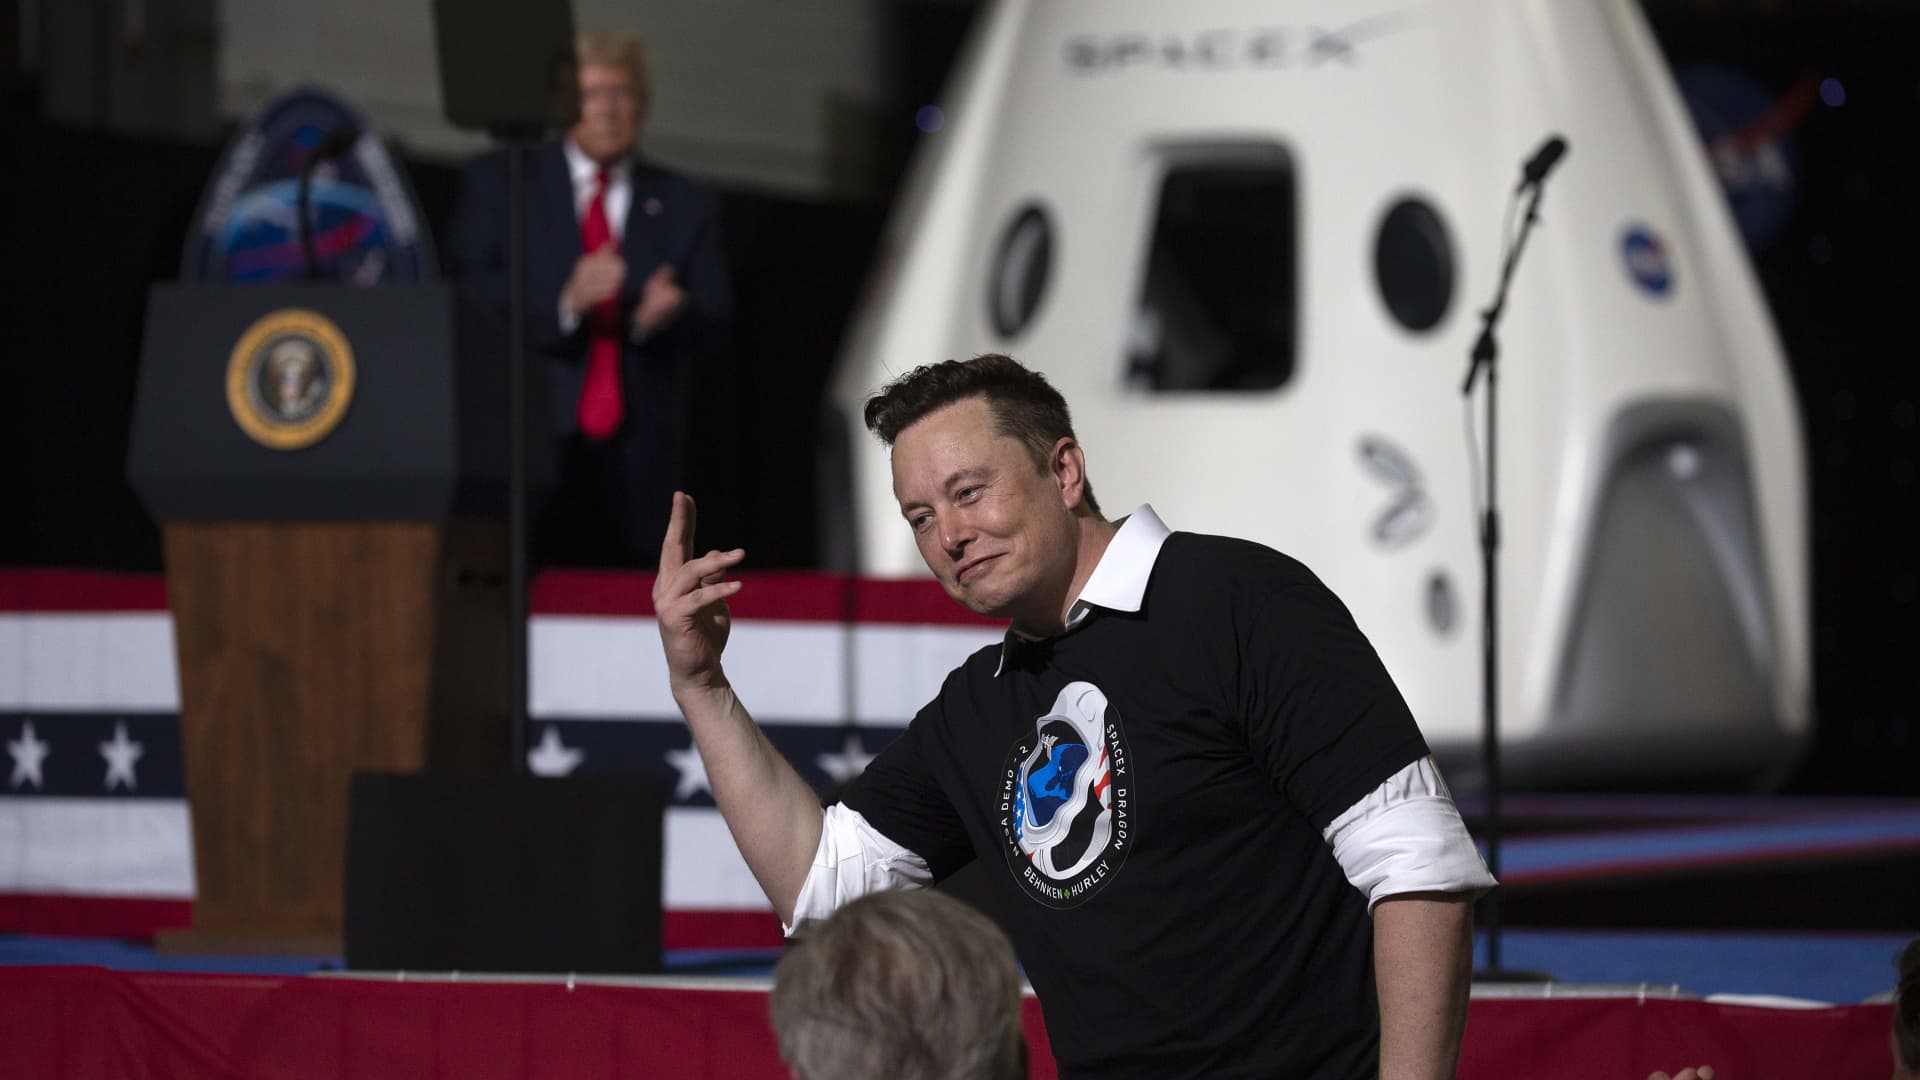 How SpaceX won the race against Boeing to send NASA astronauts to space